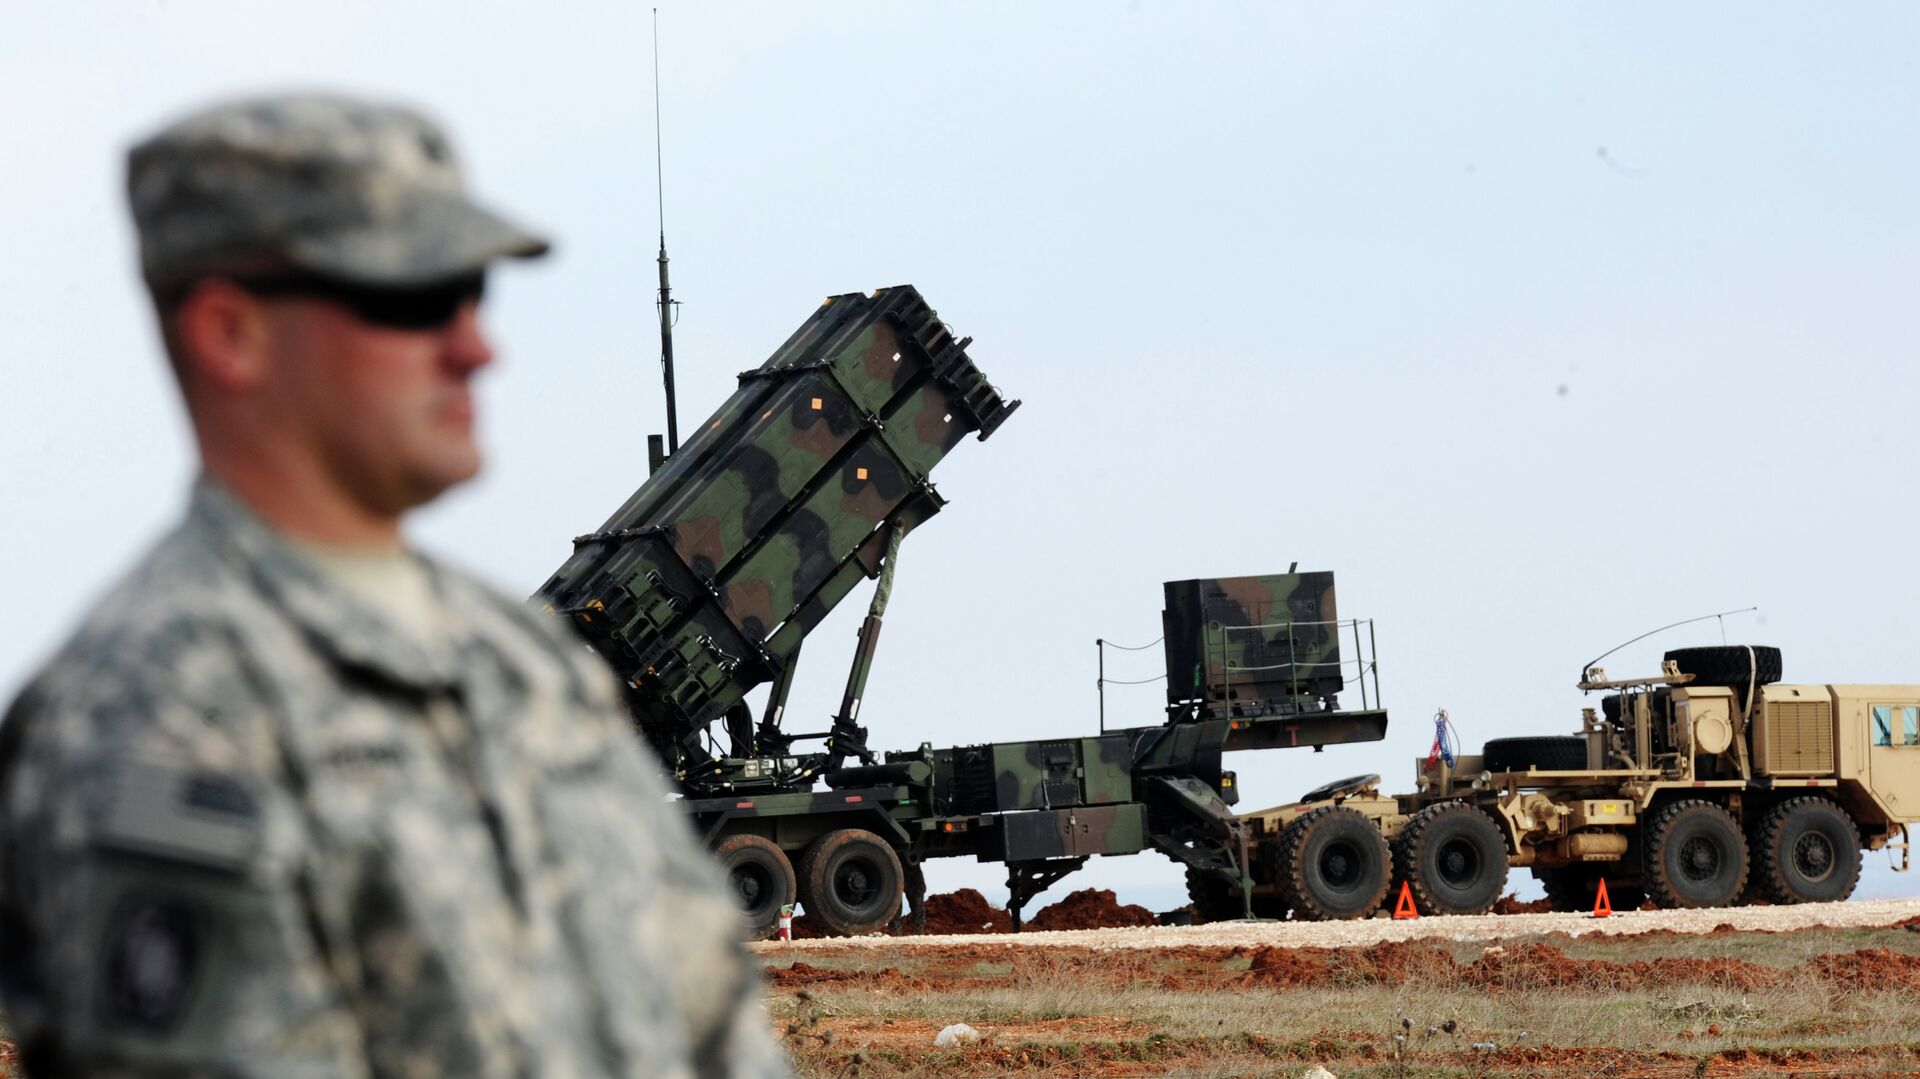 A US soldier stands in front of a Patriot missile system at a Turkish military base in Gaziantep on February 5, 2013 - Sputnik International, 1920, 11.09.2021